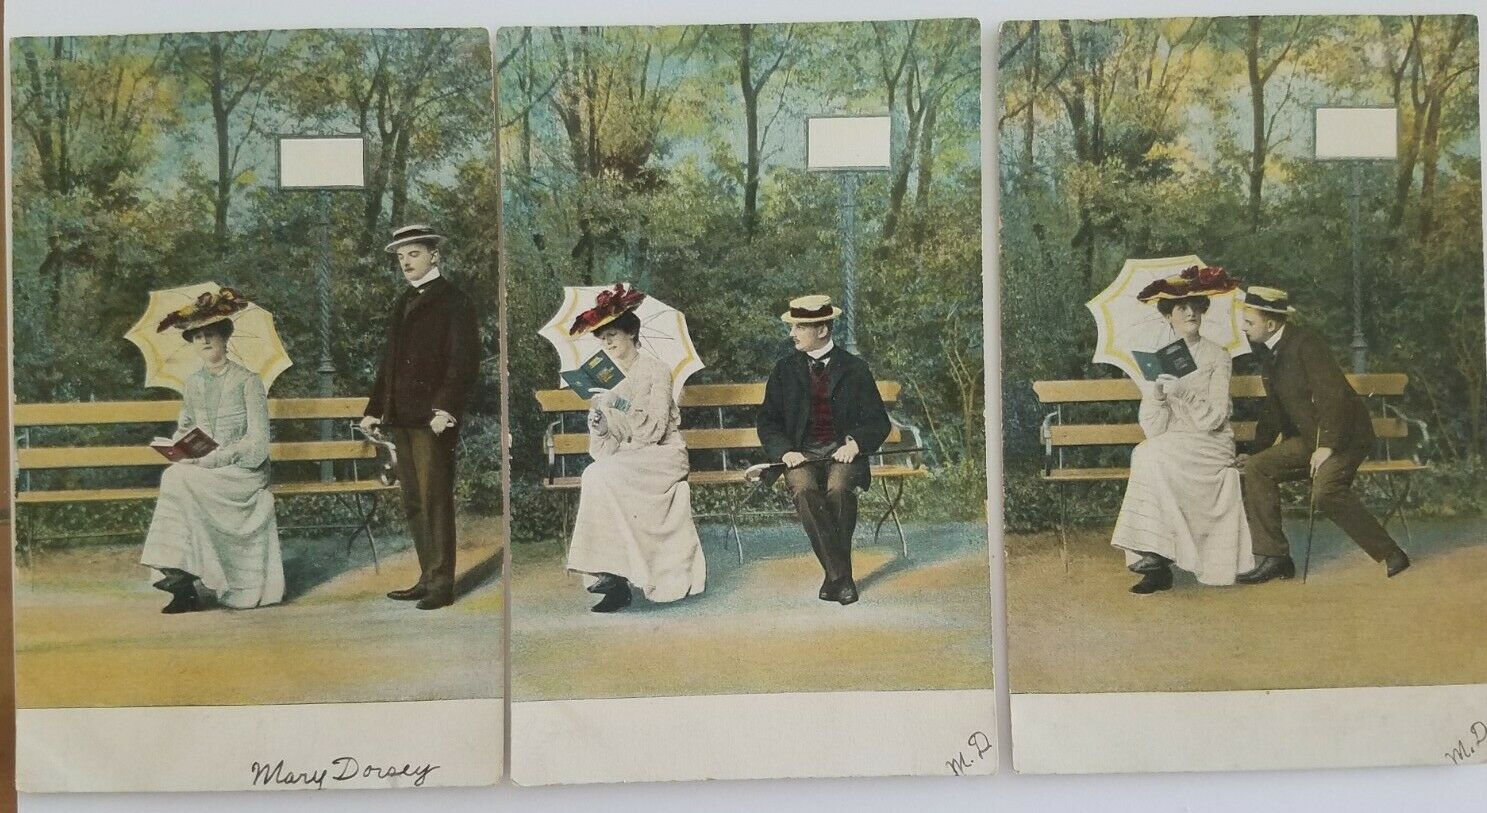 Vintage c1910 Postcard Series - First Meeting on a Park Bench